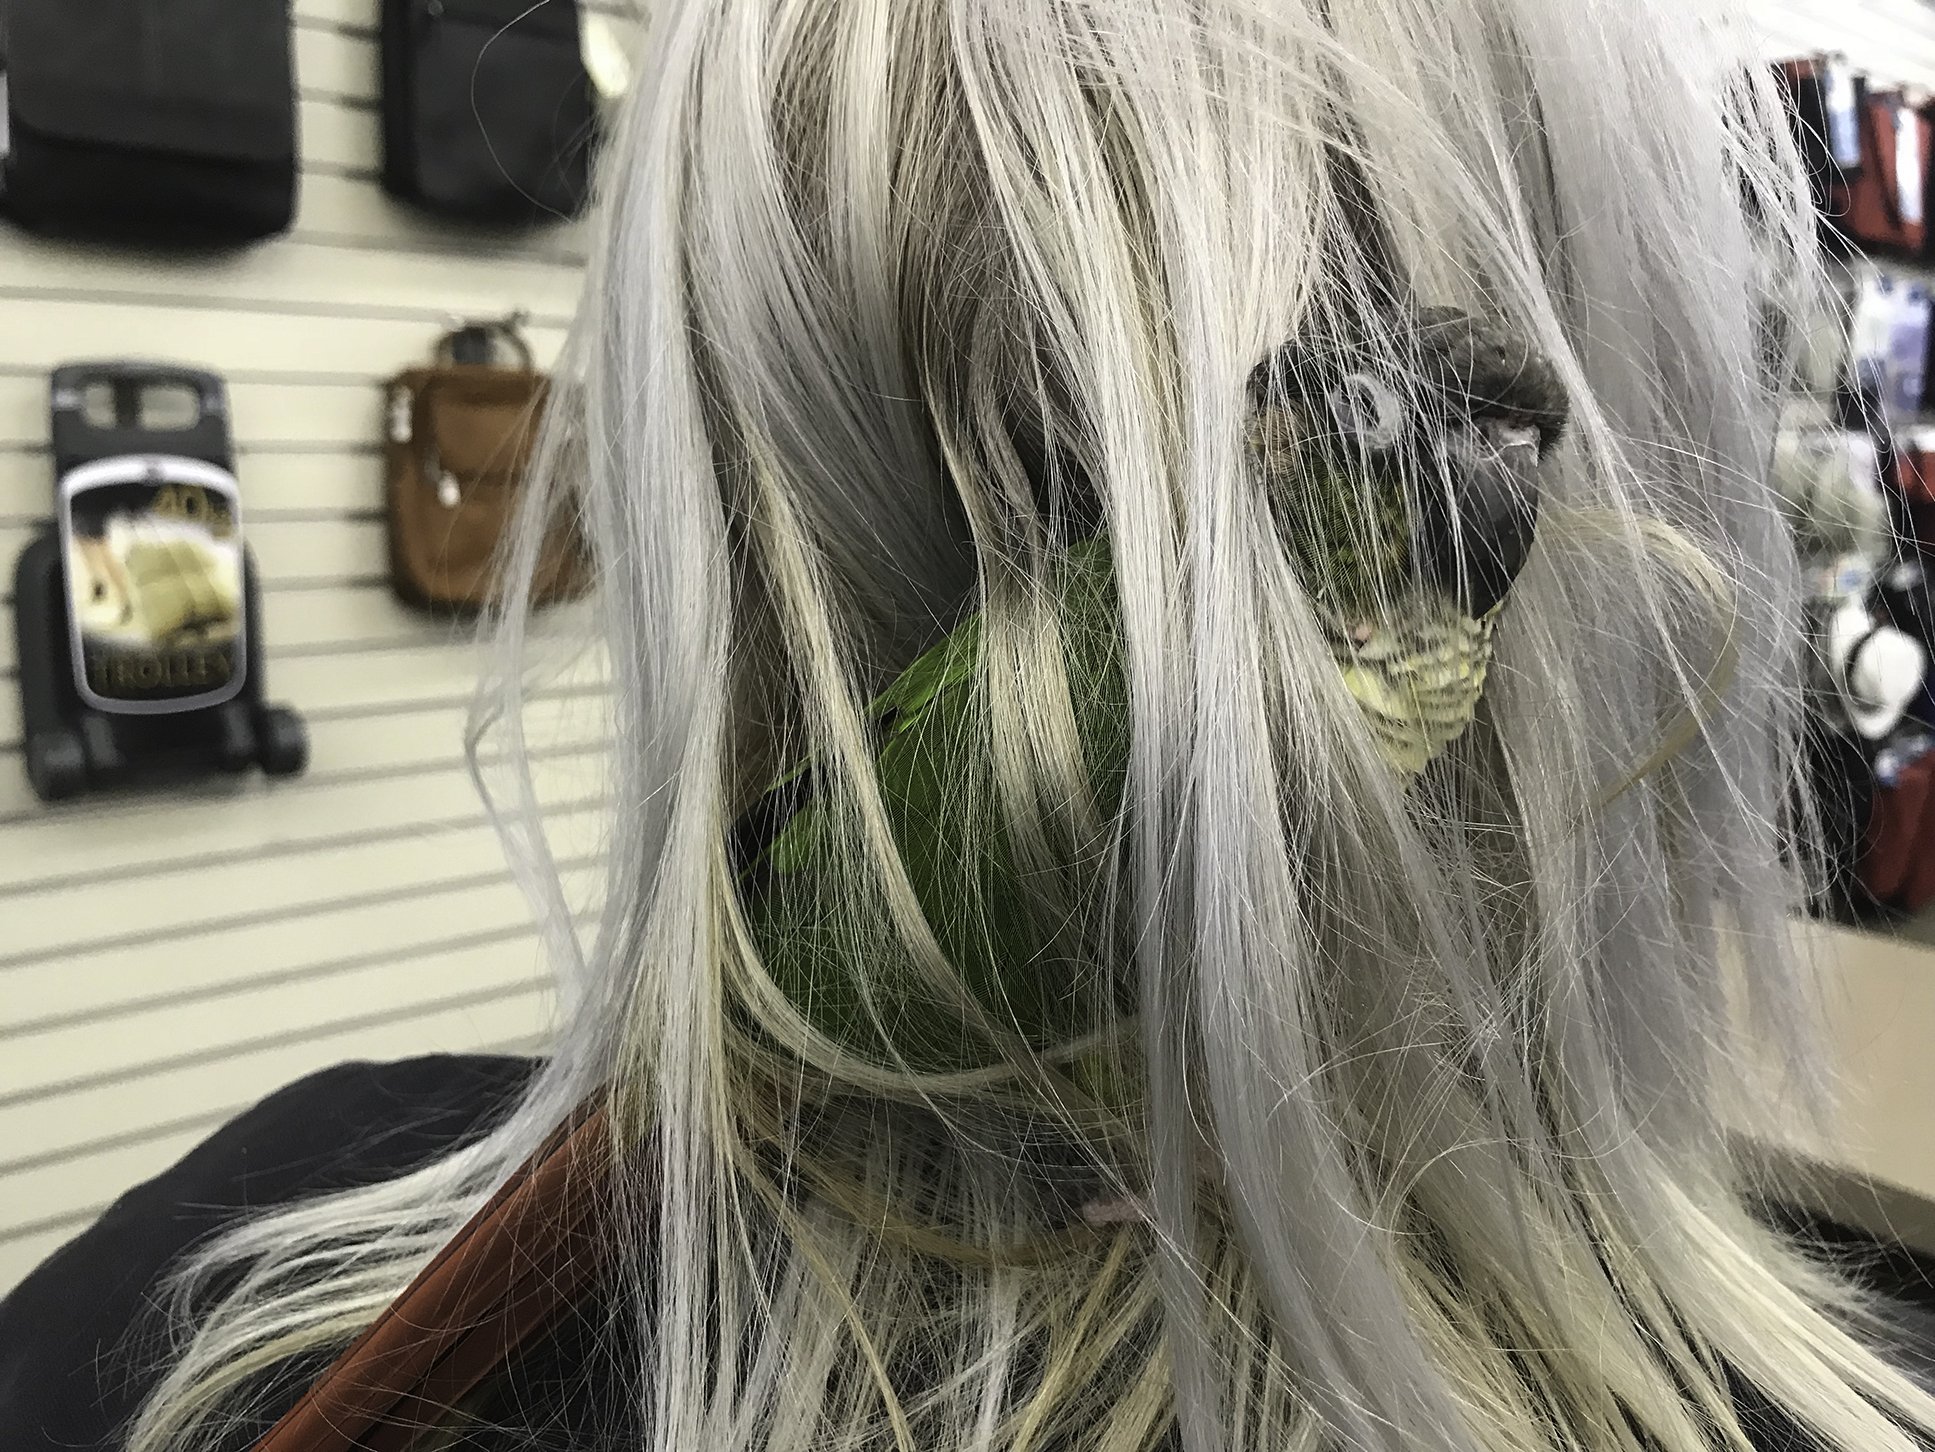 The Parrot Who Lives in the Clerk's Hair Who Works in the Luggage Store on Shattuck Avenue in Berkeley